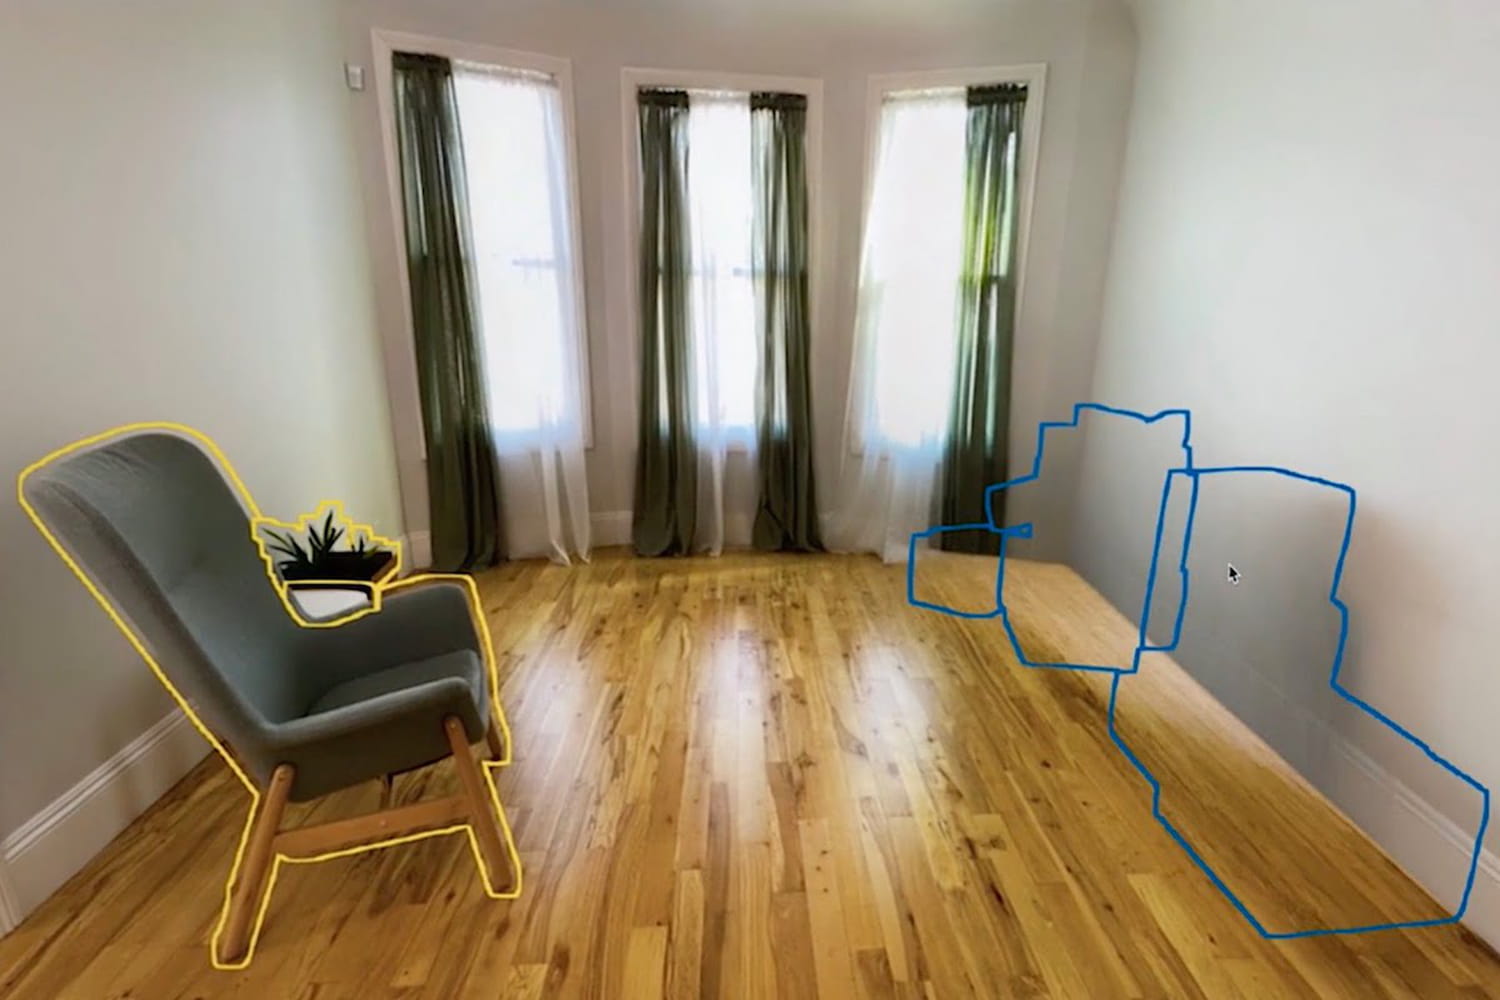 A tool for testing furniture in virtual mode

